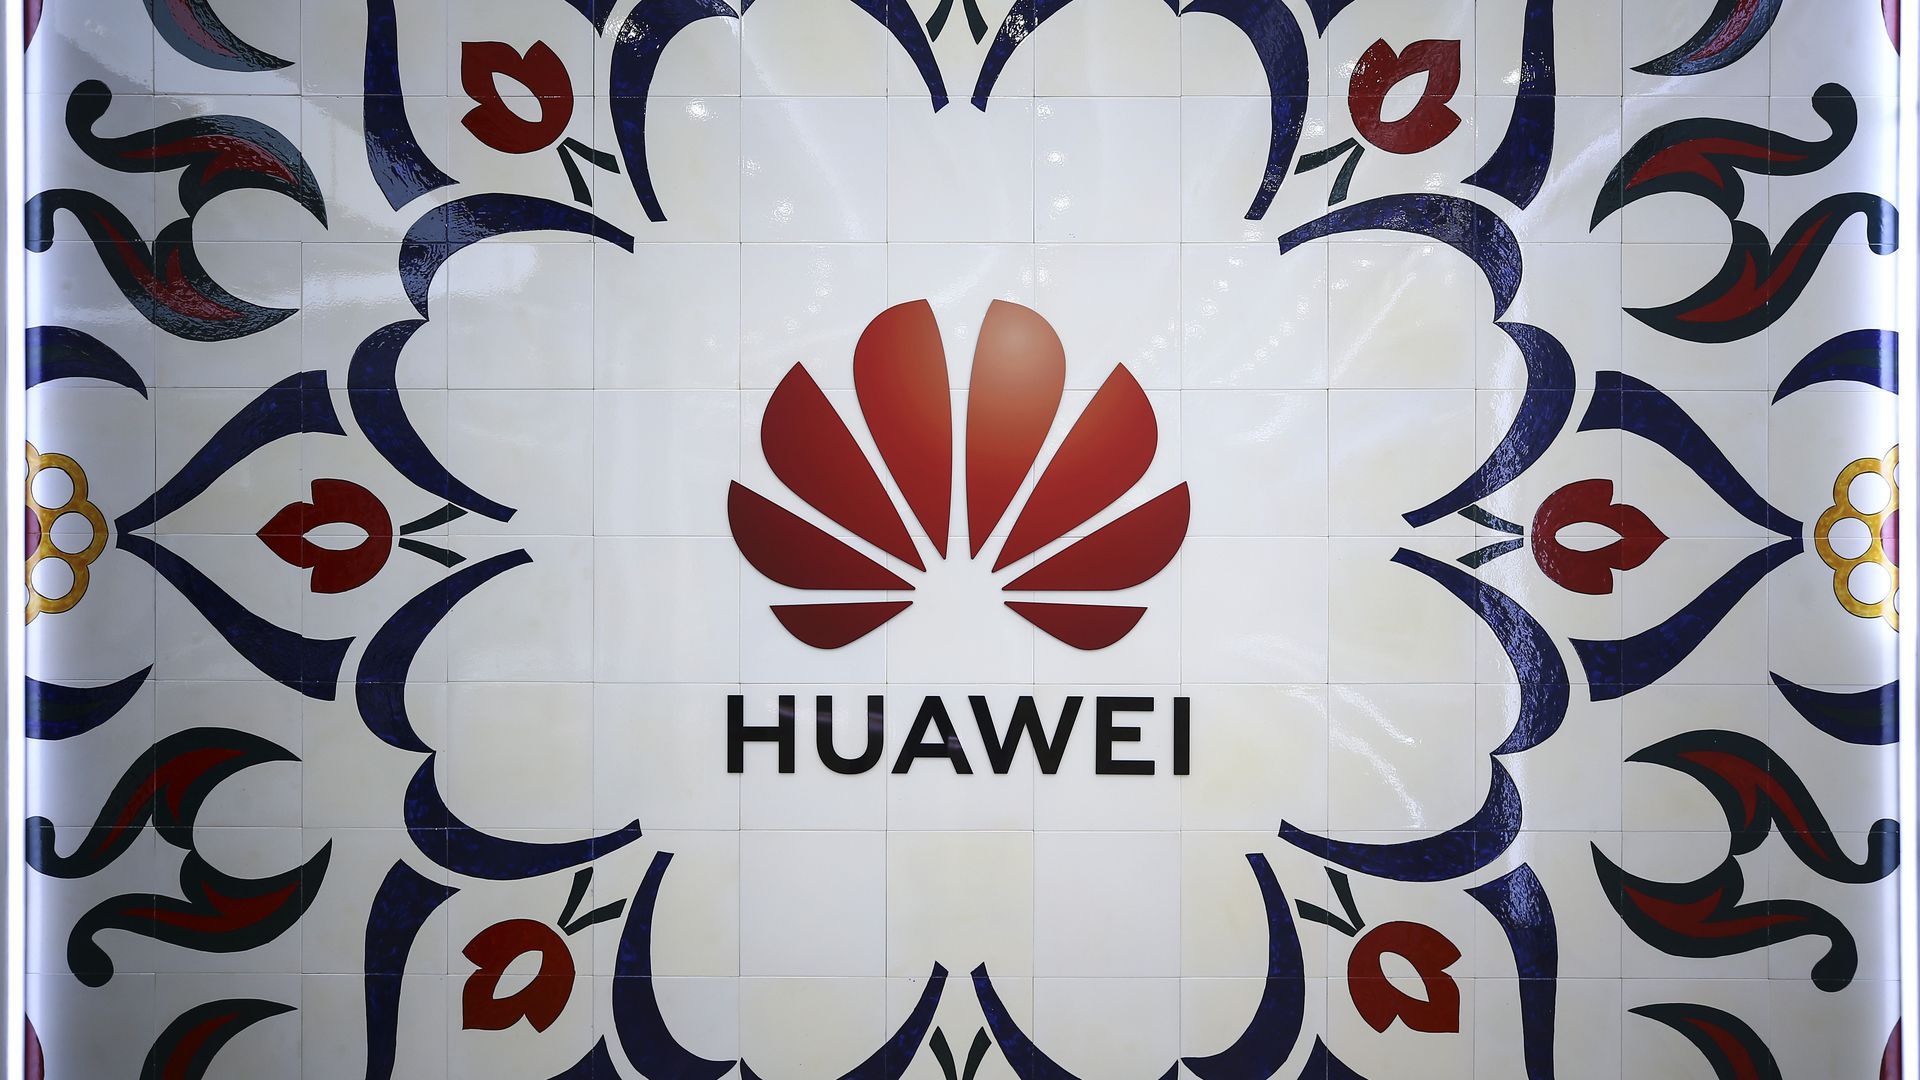 The Huawei logo, taken from the firm's Istanbul office. 